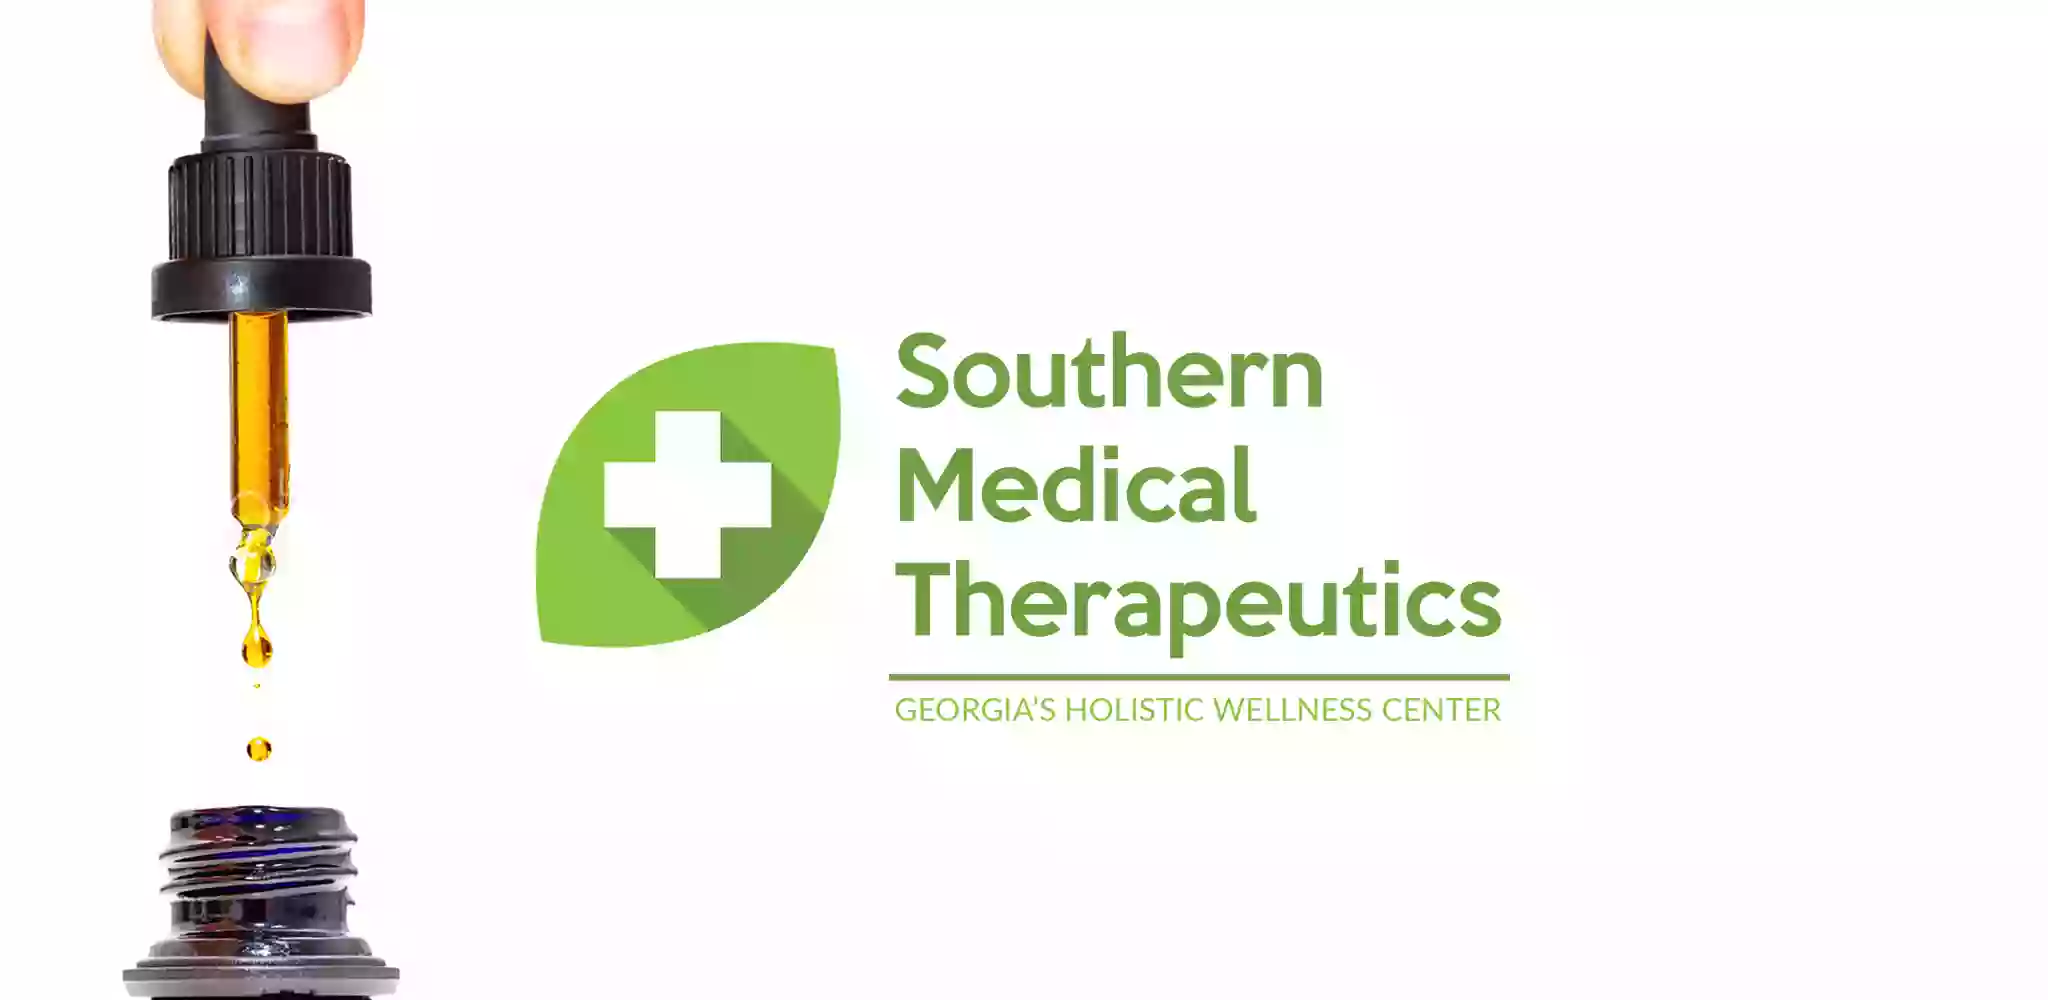 Southern Medical Therapeutics